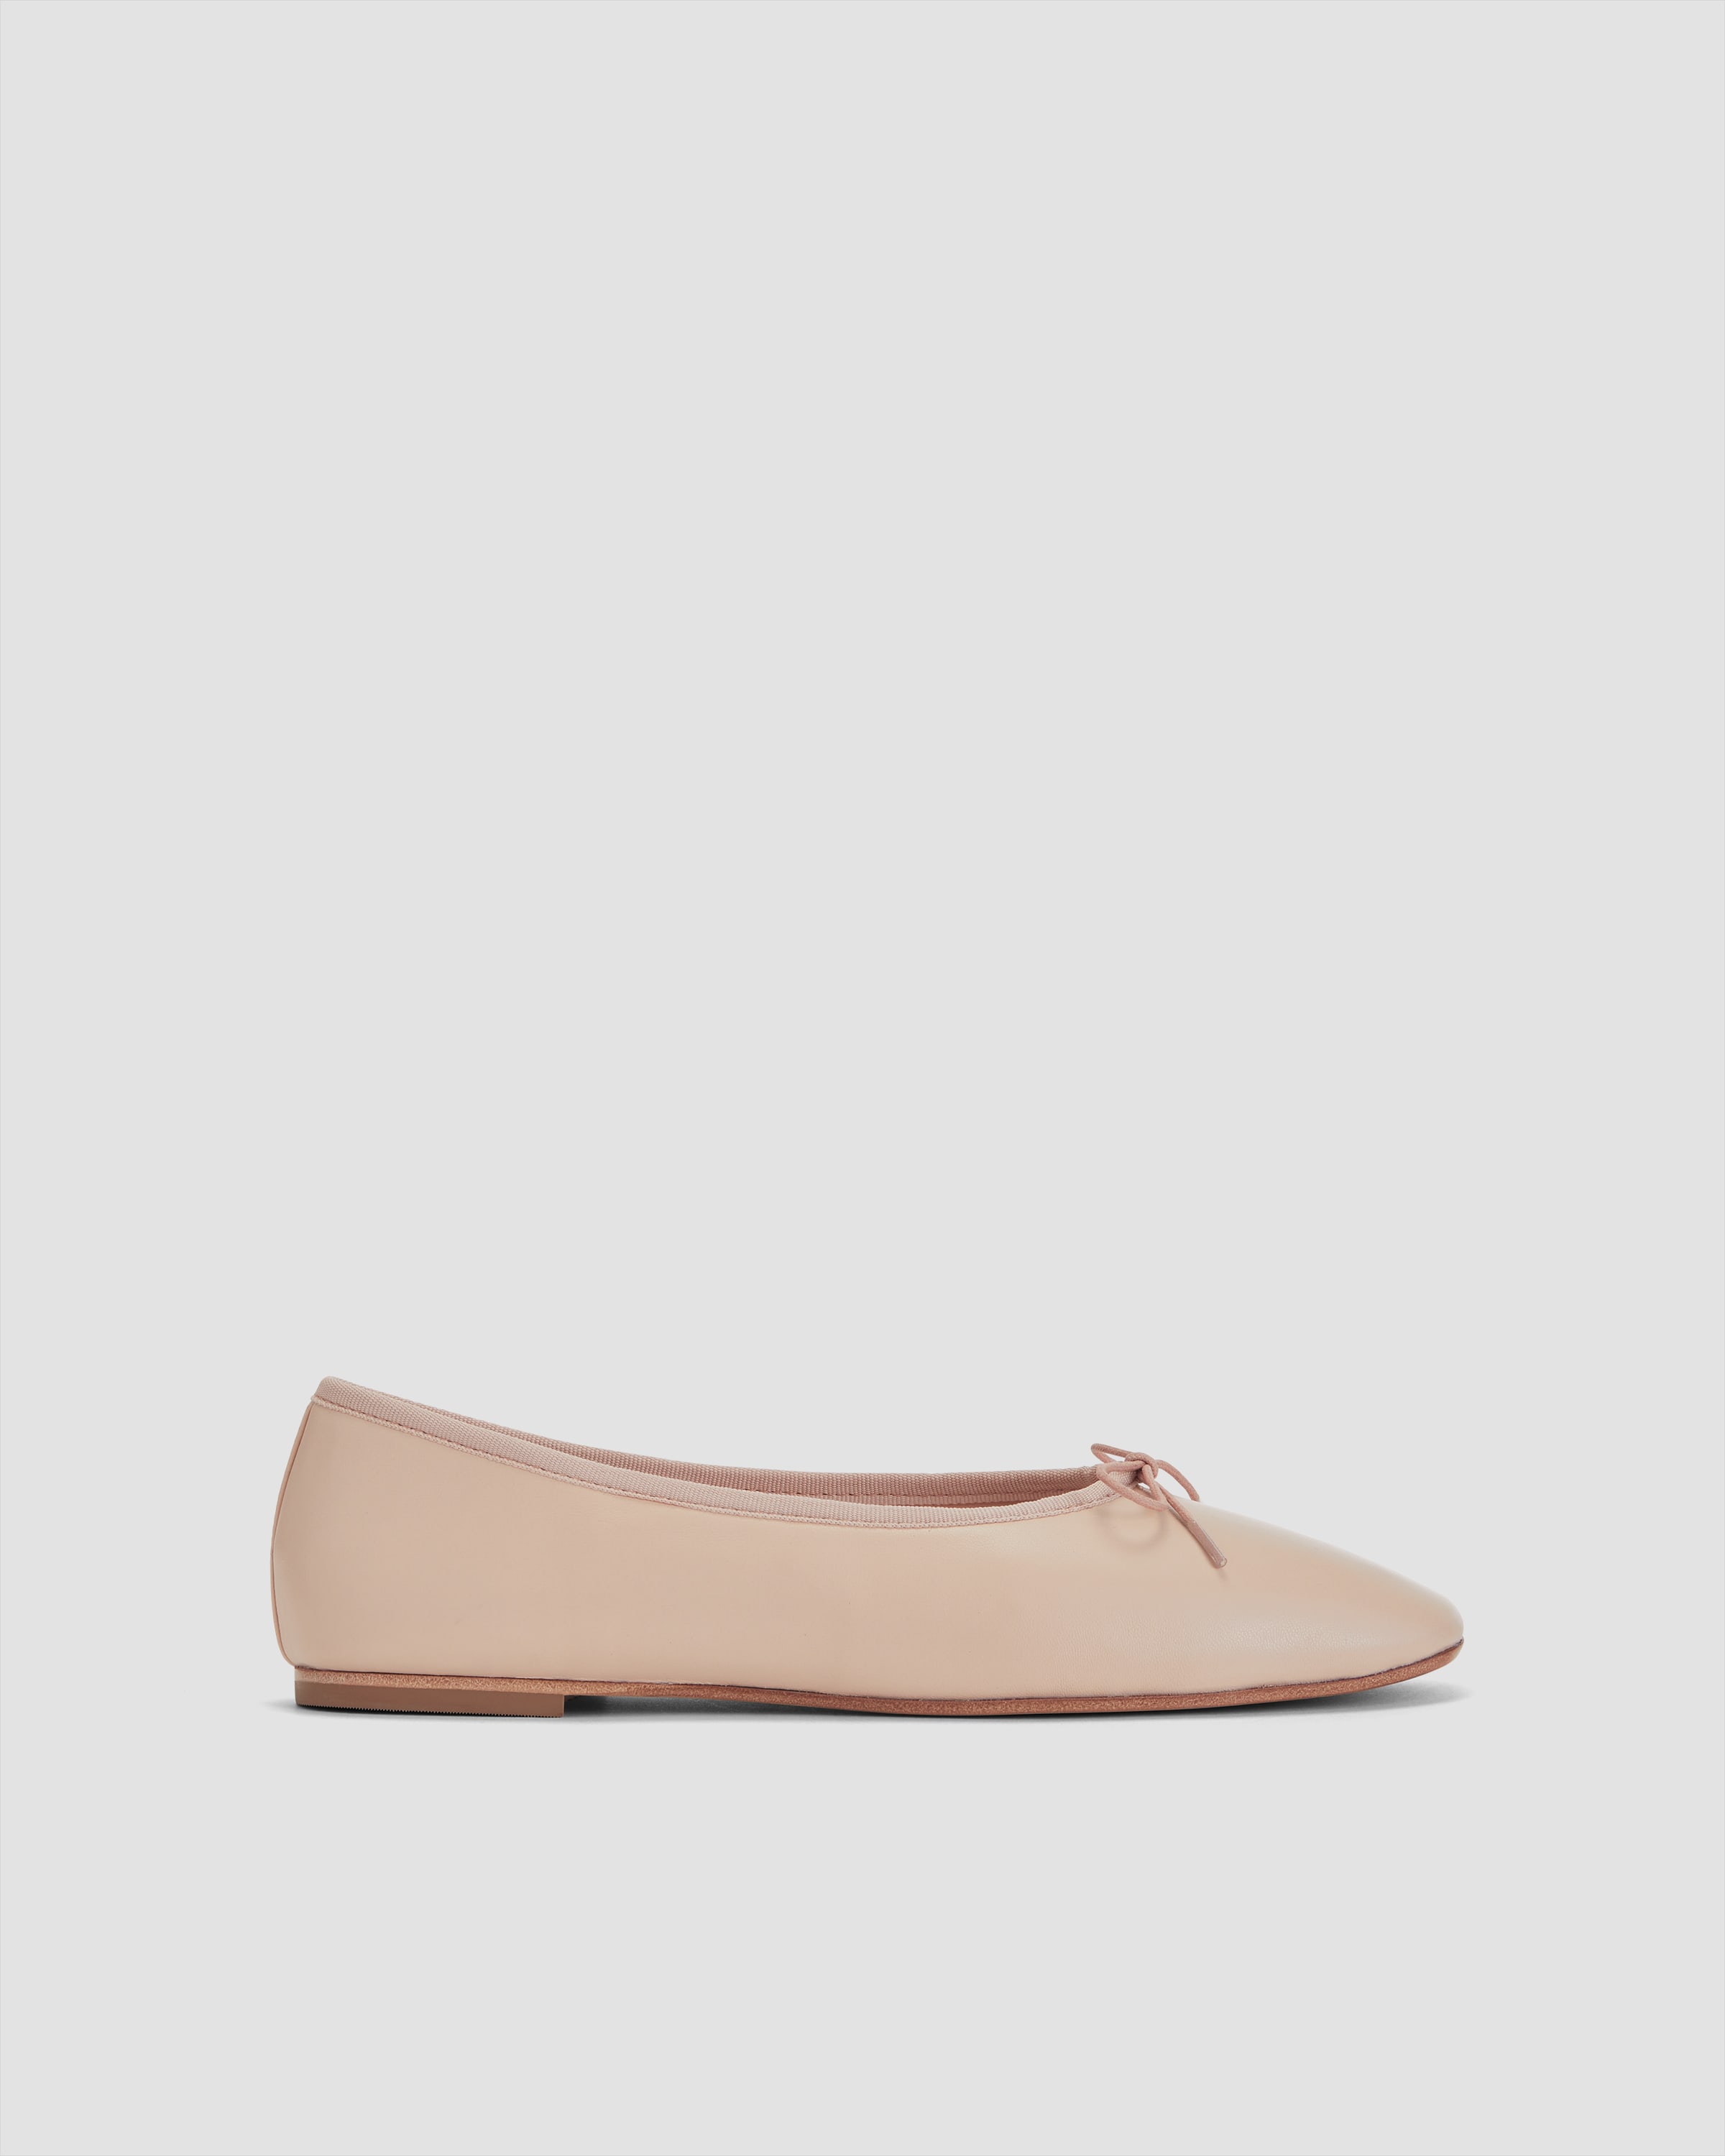 The Day Ballet Flat Pale Pink – Everlane